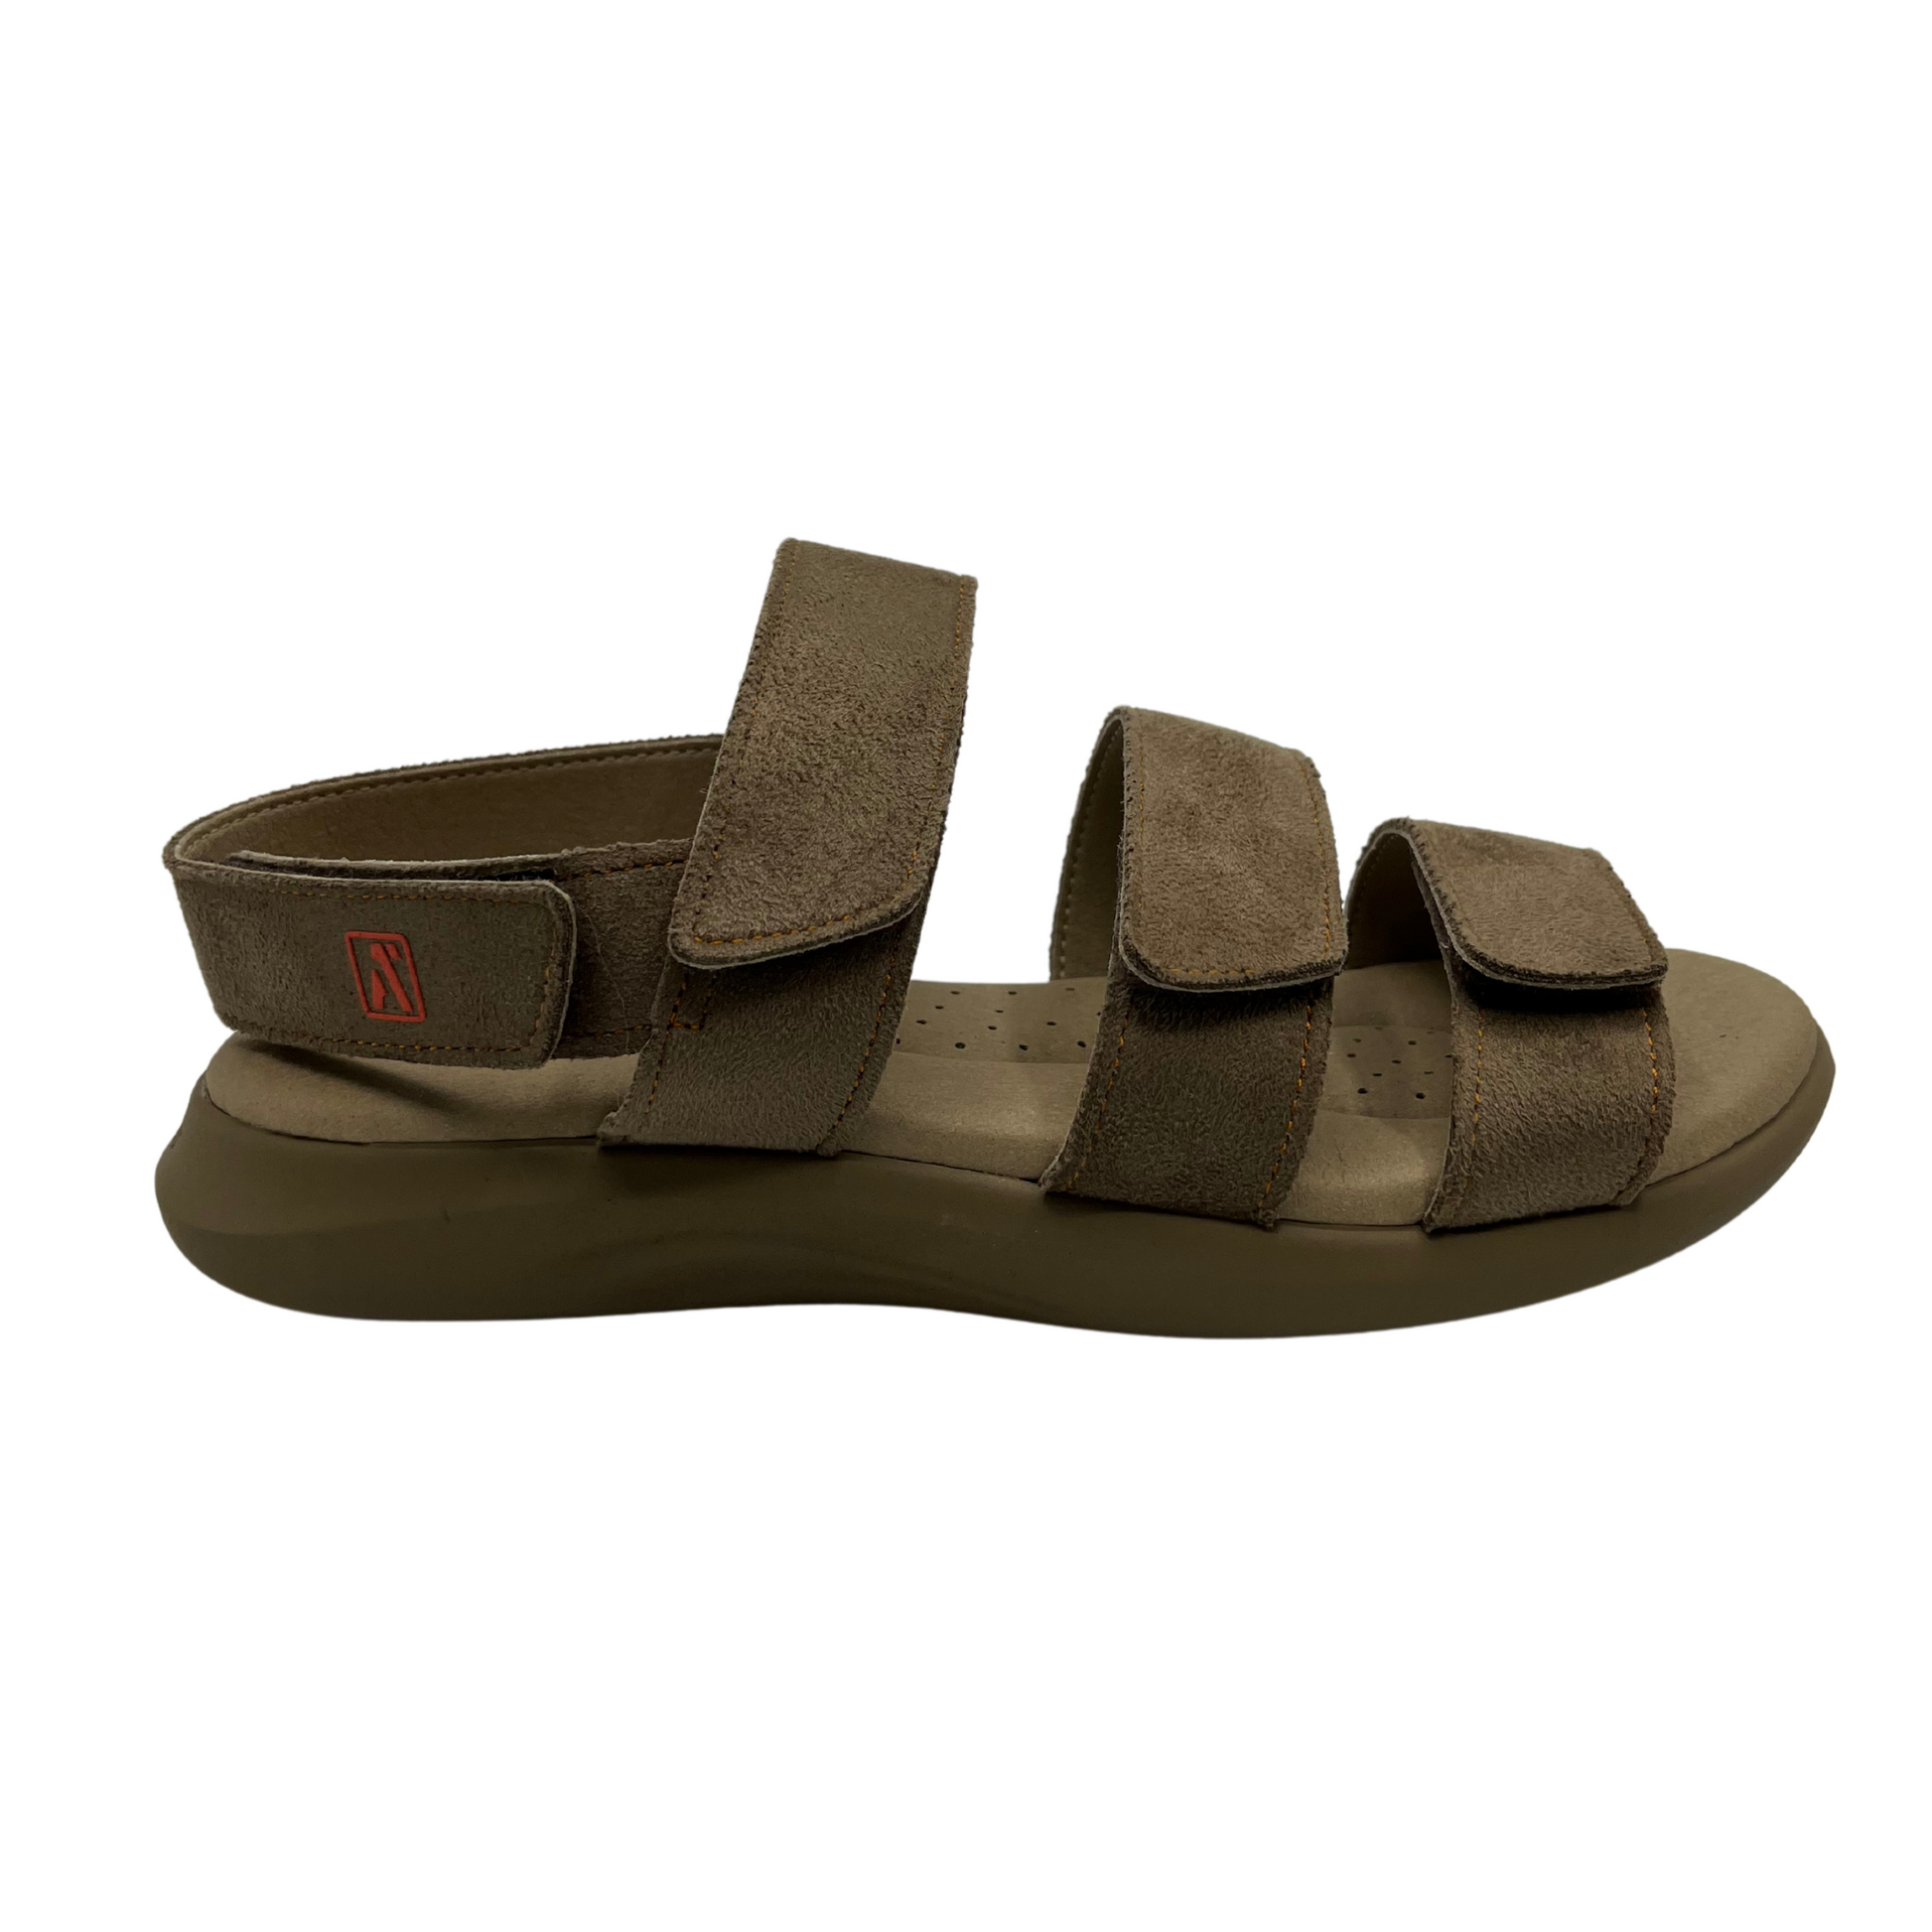 Right facing view of taupe leather sandals with 4 adjustable velcro straps. Cushioned footbed and open toe.